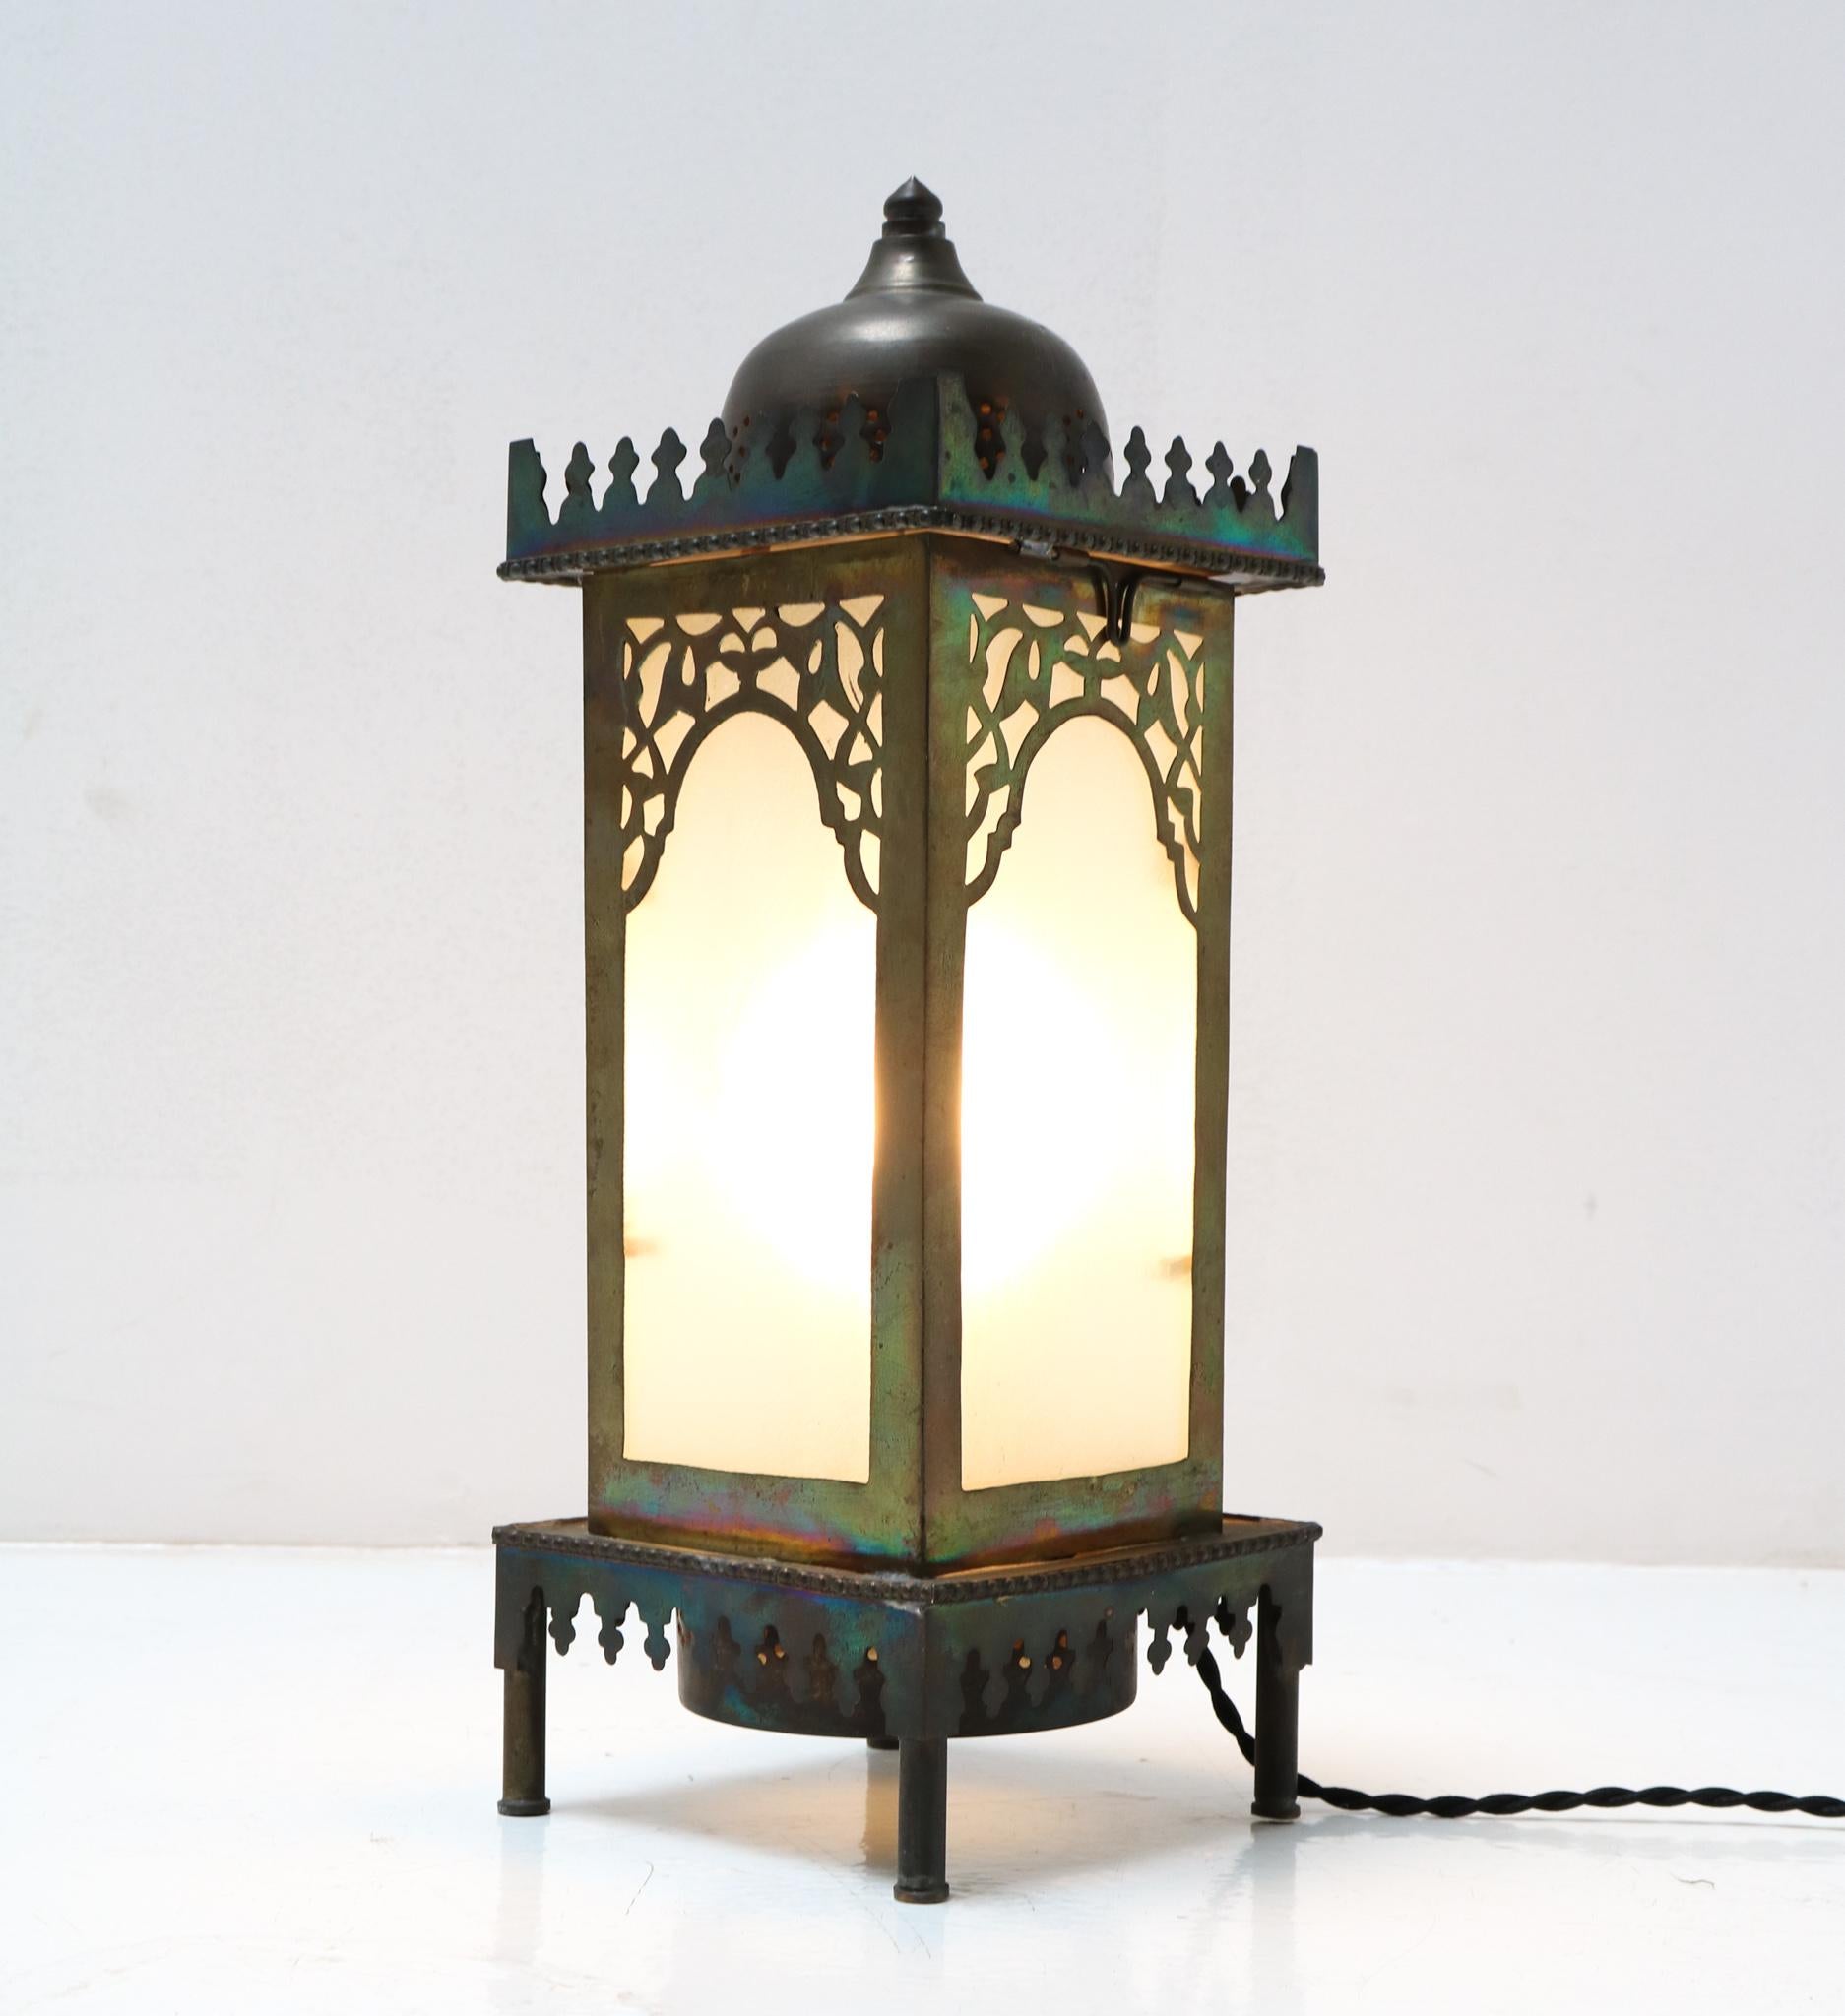 Stunning and rare Arts & Crafts Art Nouveau table lamp.
Striking Dutch design from the 1900s.
Patinated brass frame with original glass shades.
Rewired with original socket for E-14 light bulb.
This wonderful Arts & Crafts Art Nouveau table lamp